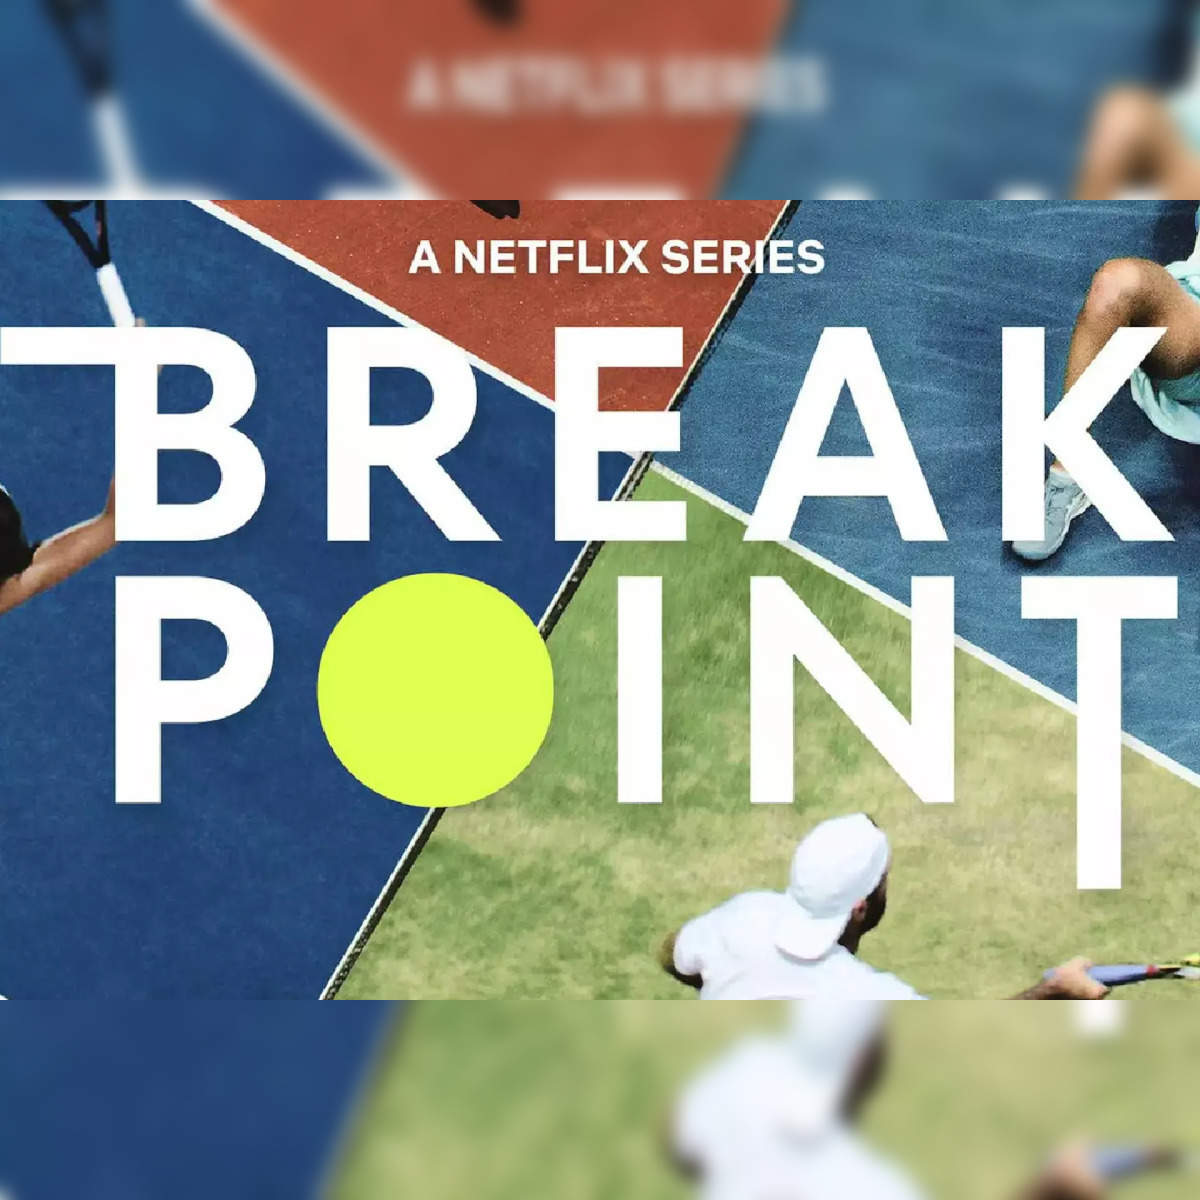 Is there a Netflix curse on Australian Open tennis players?